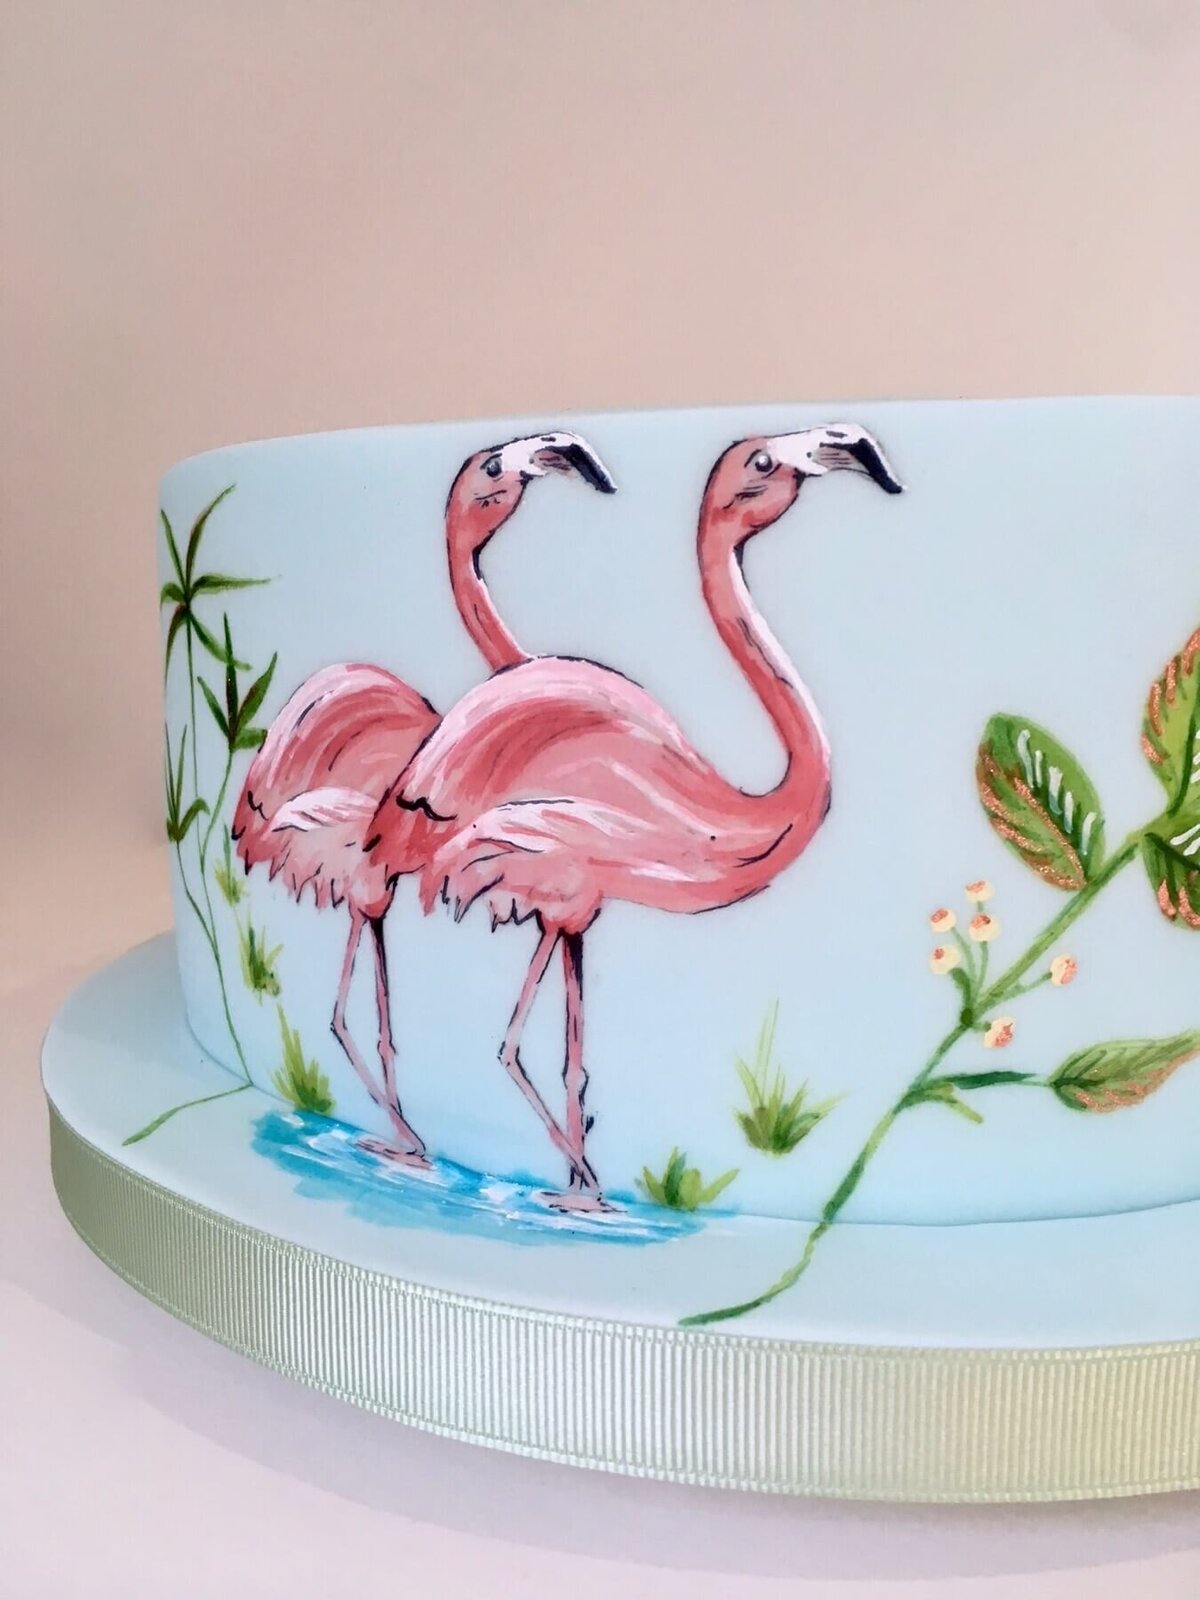 A  close up of a beautiful hand painted cake showing two flamingoes and foliage